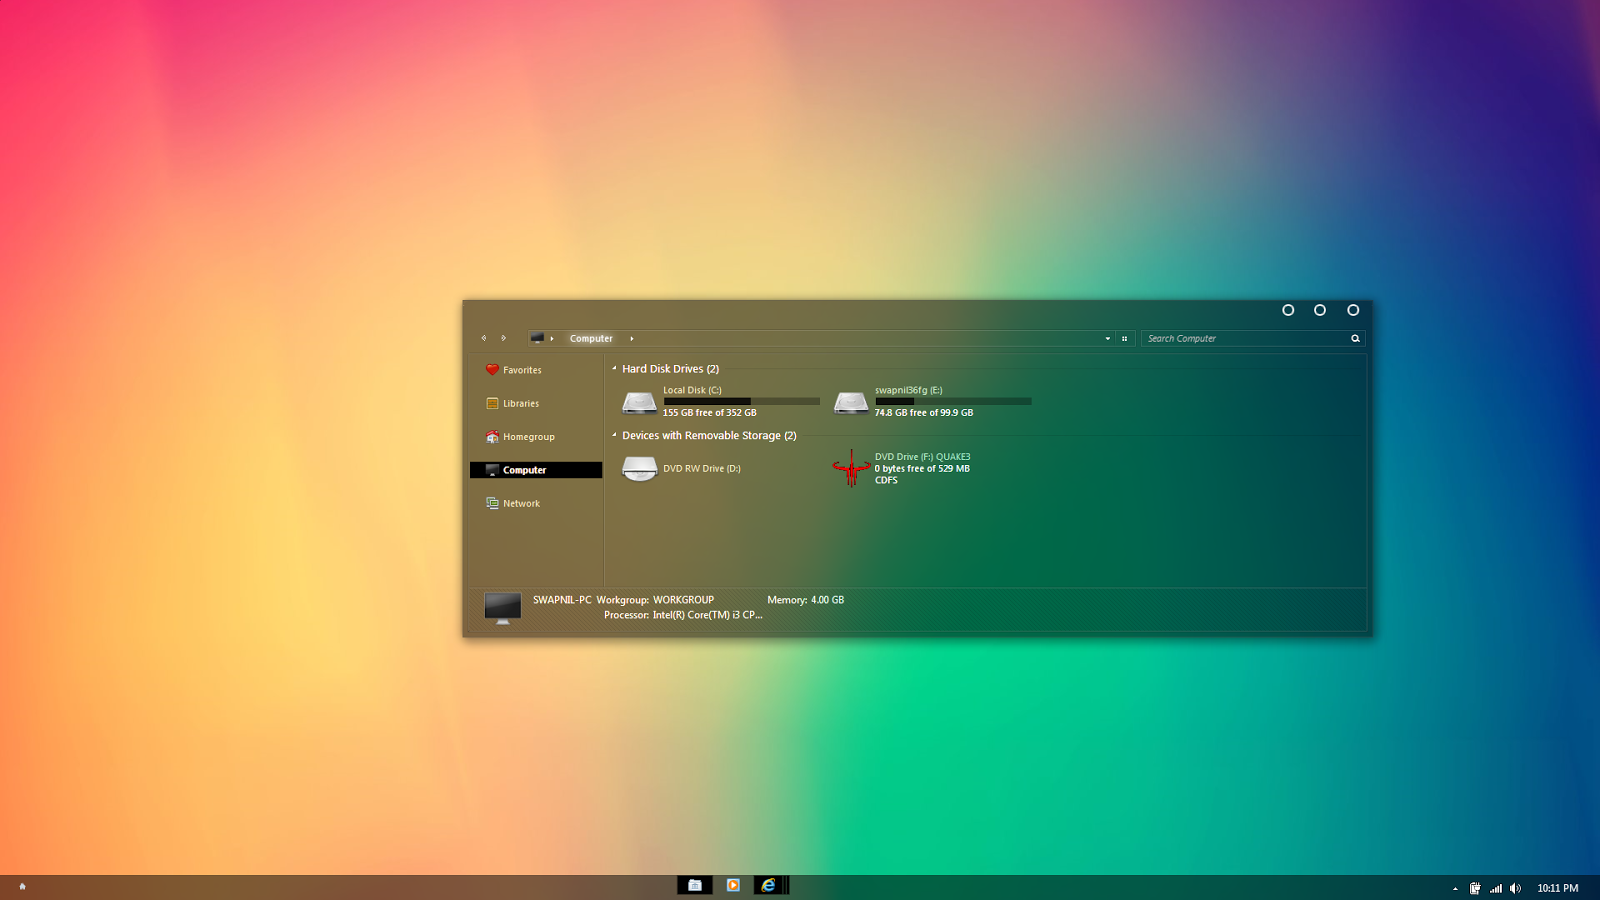 download clear glass theme windows 7